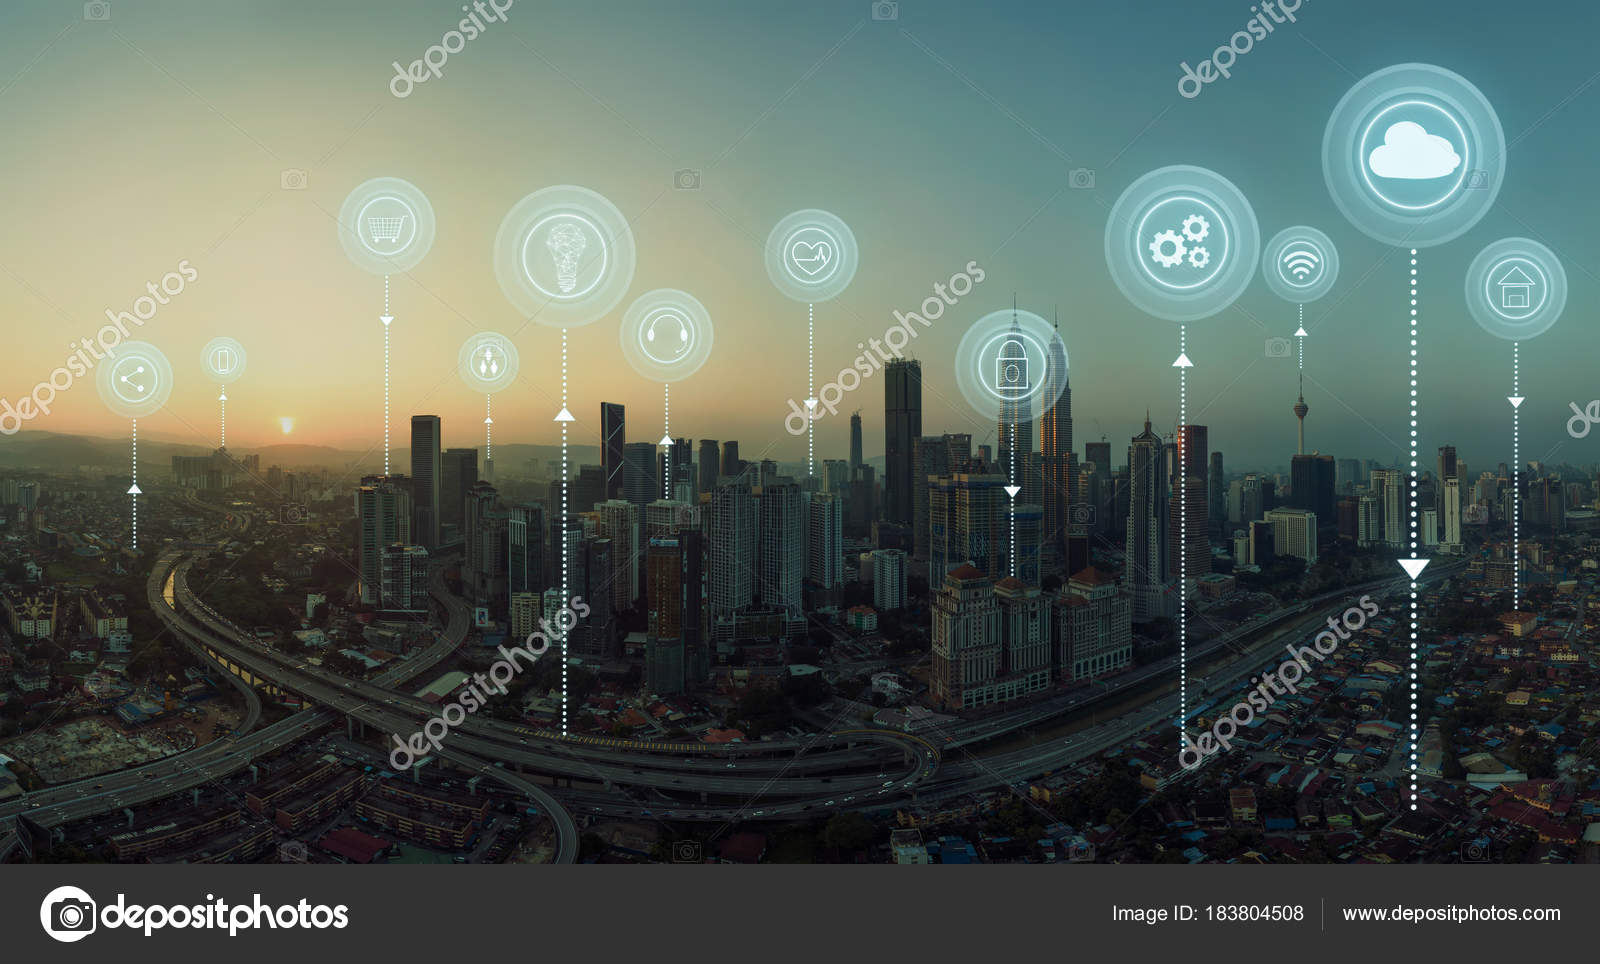 Corporation knal steeg Panorama Aerial View Cityscape Skyline Smart Services Icons Internet Things  Stock Photo by ©jamesteohart 183804508